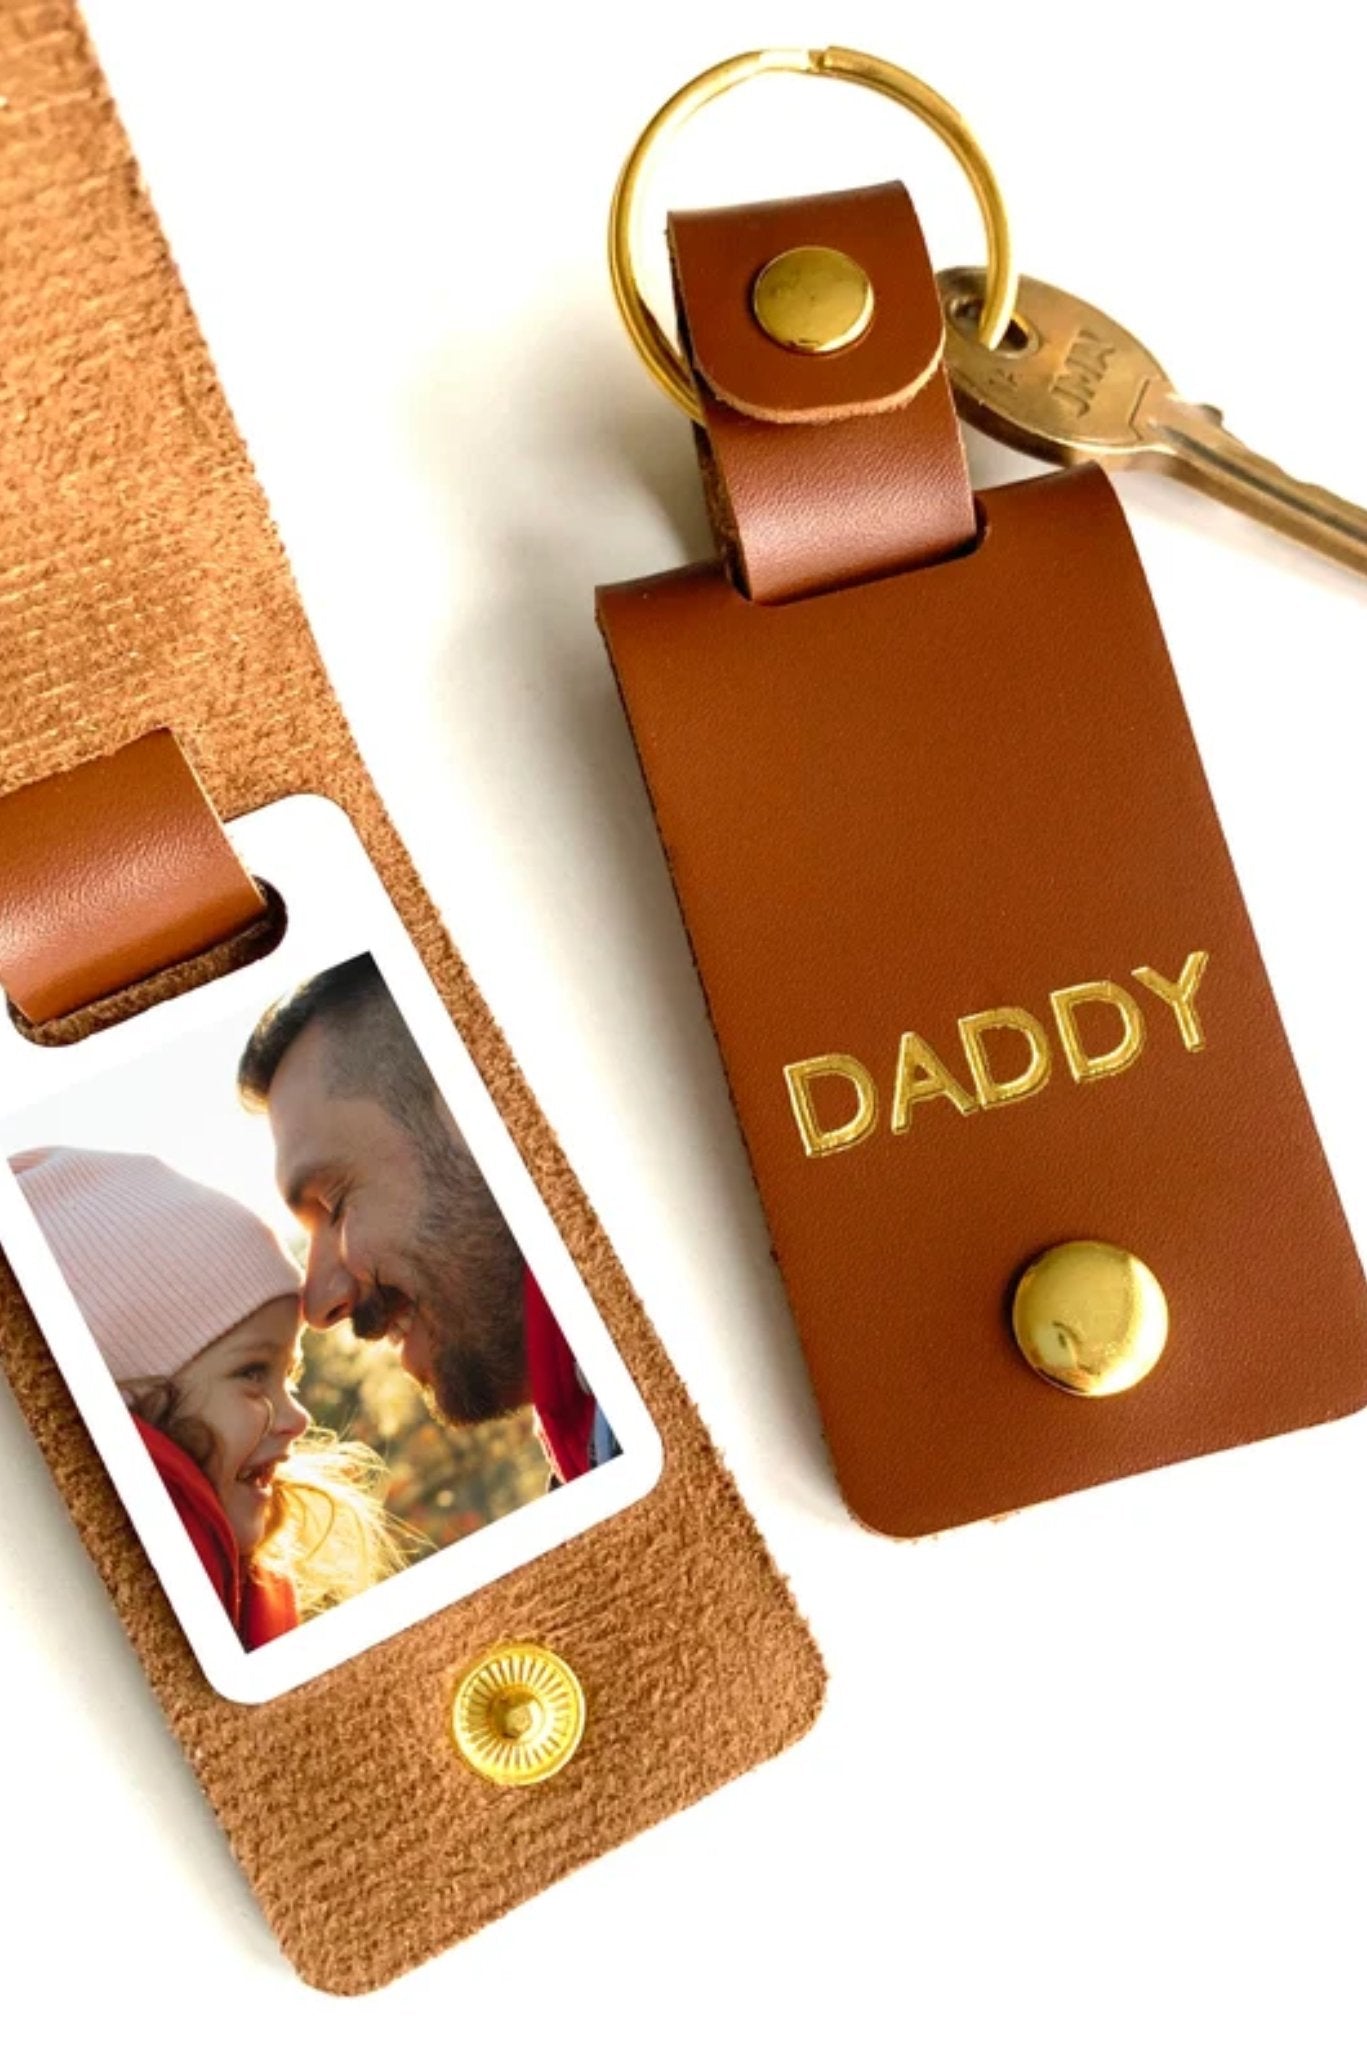 Top 5 Christmas Gifts for Dad - Pretty Collected